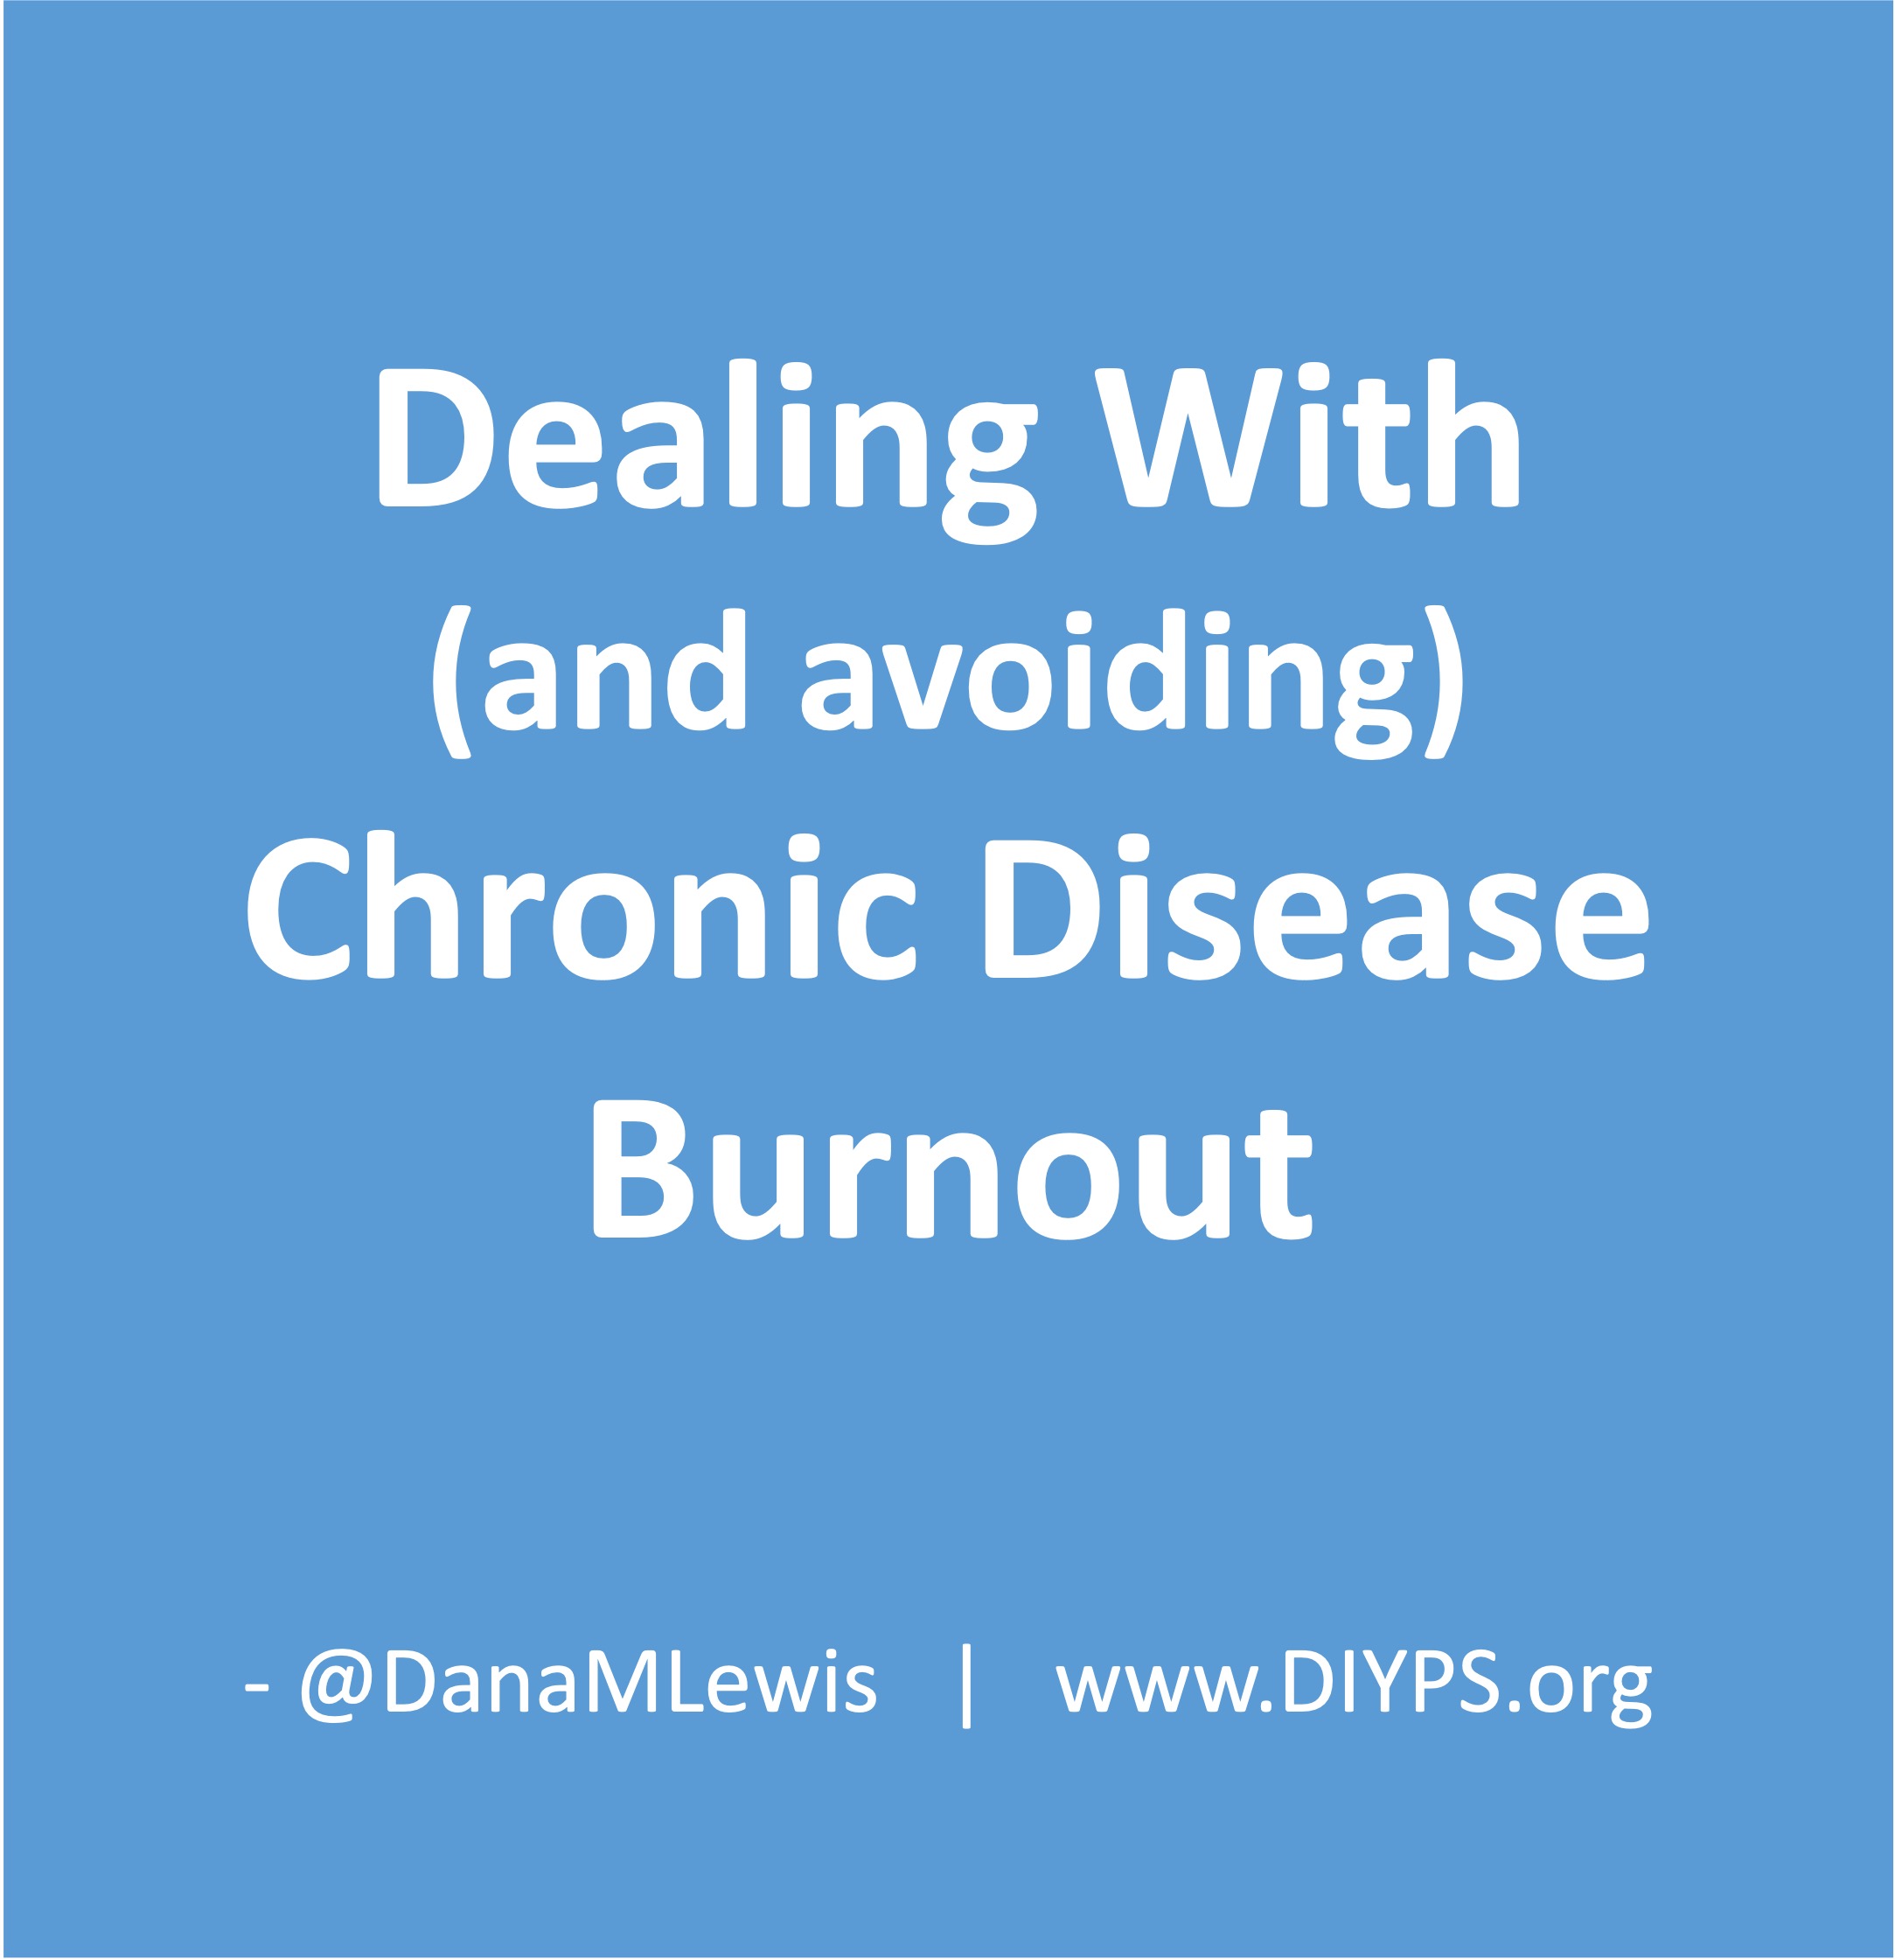 Dealing with and avoiding chronic disease burnout by Dana M. Lewis